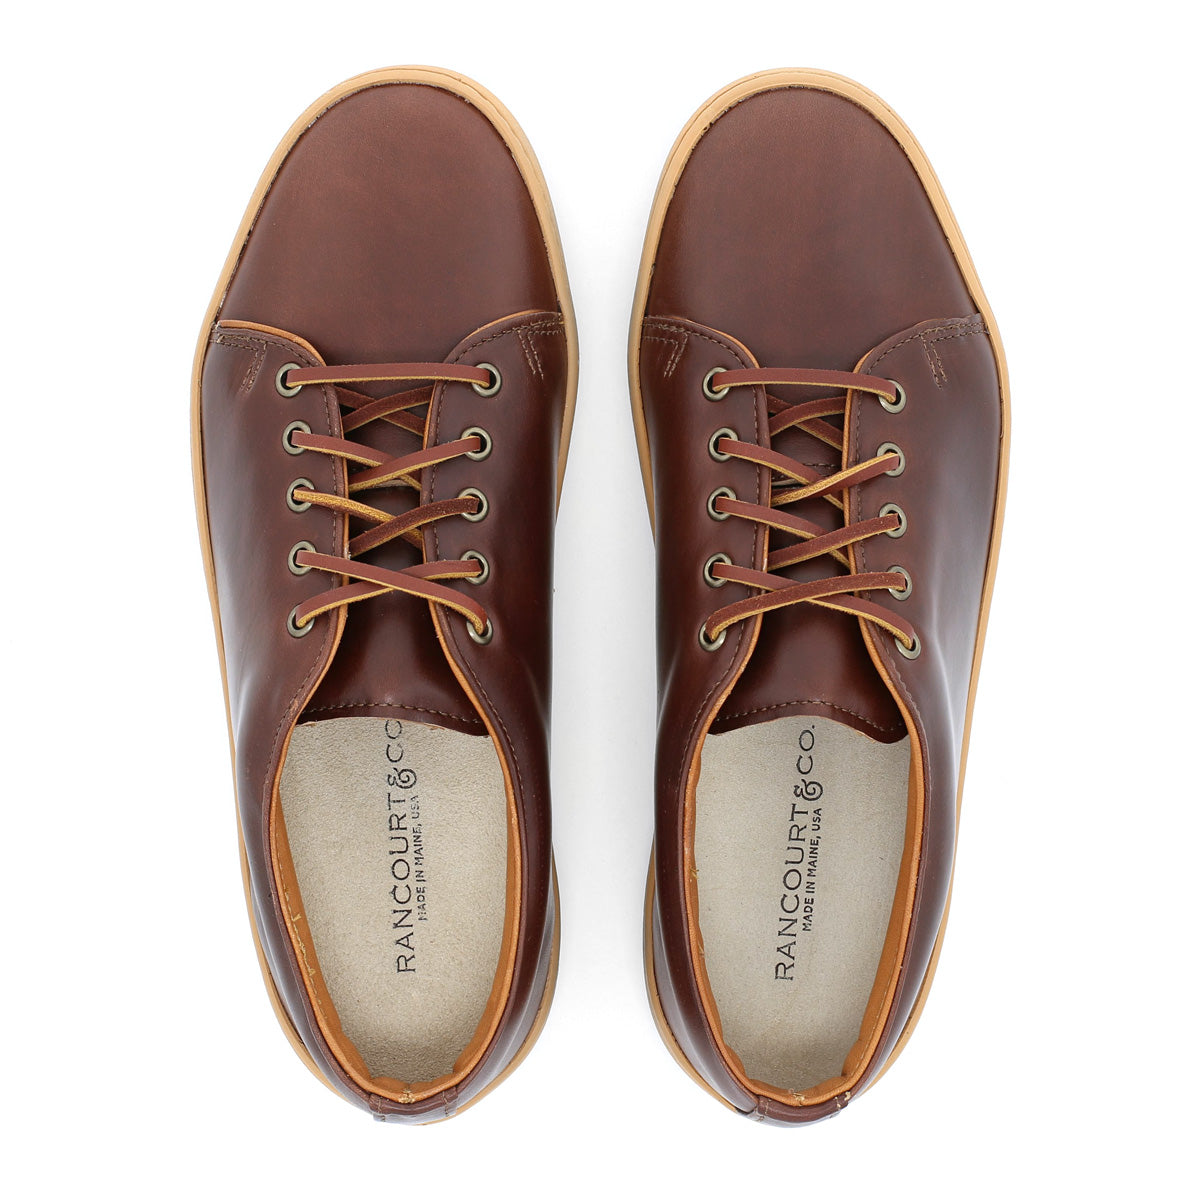 Heritage Court Classic  Low - Carolina Brown Chromexcel | Rancourt & Co.  | Men's Boots and Shoes